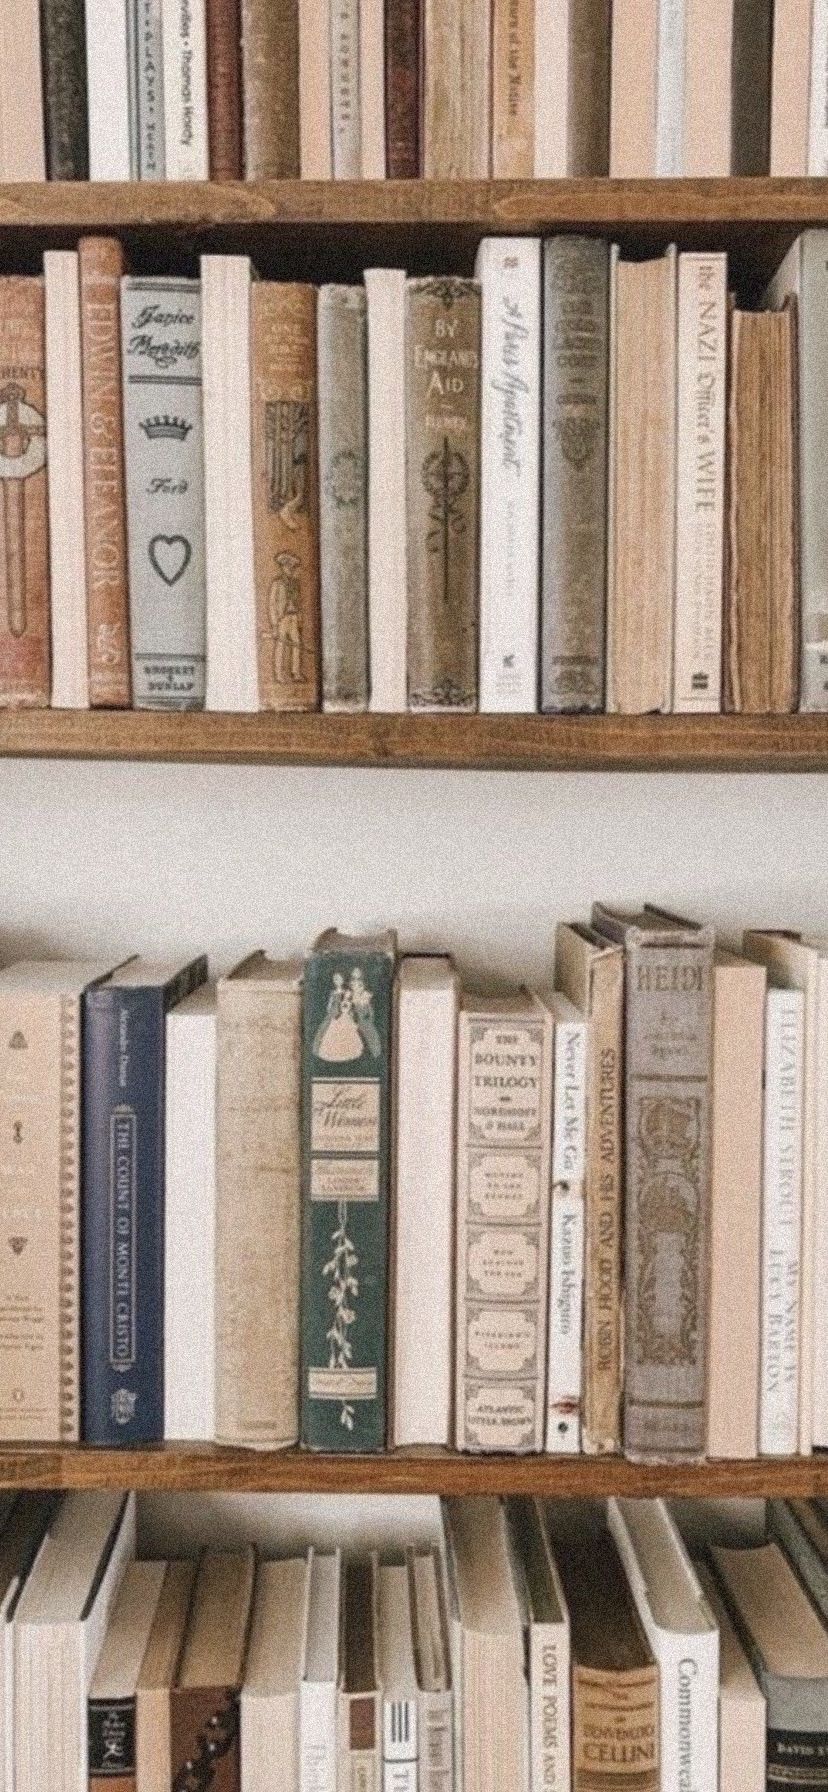 Old books on a wooden shelf - Books